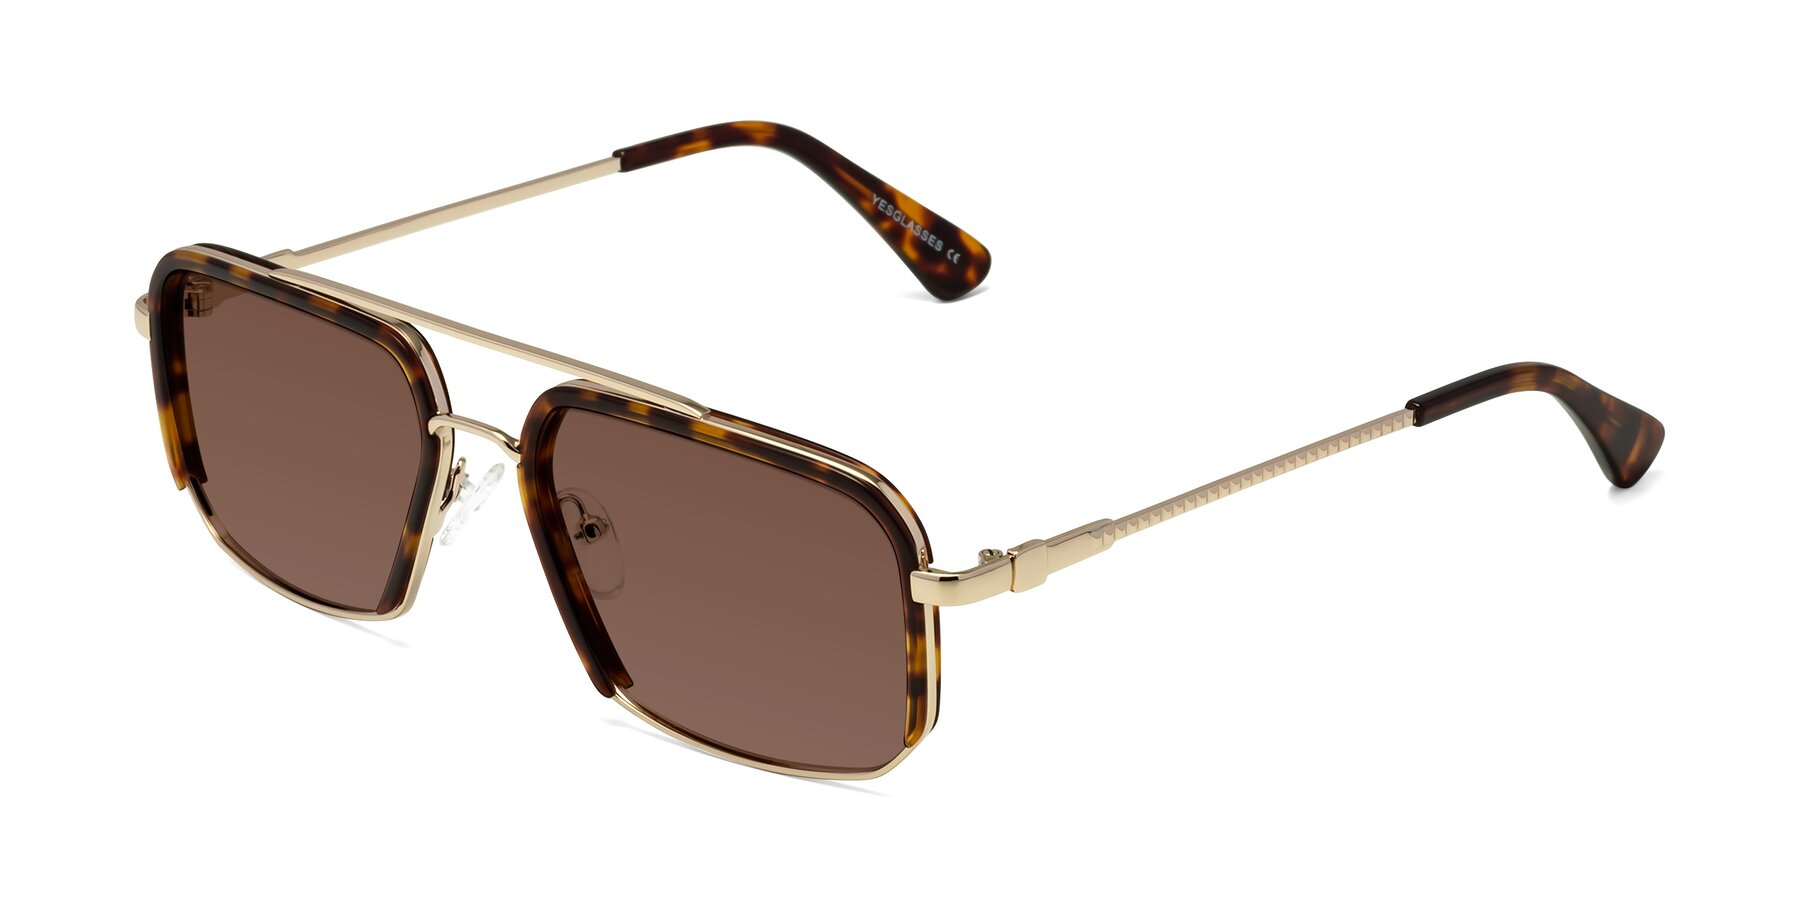 Angle of Dechter in Tortoise-Gold with Brown Tinted Lenses